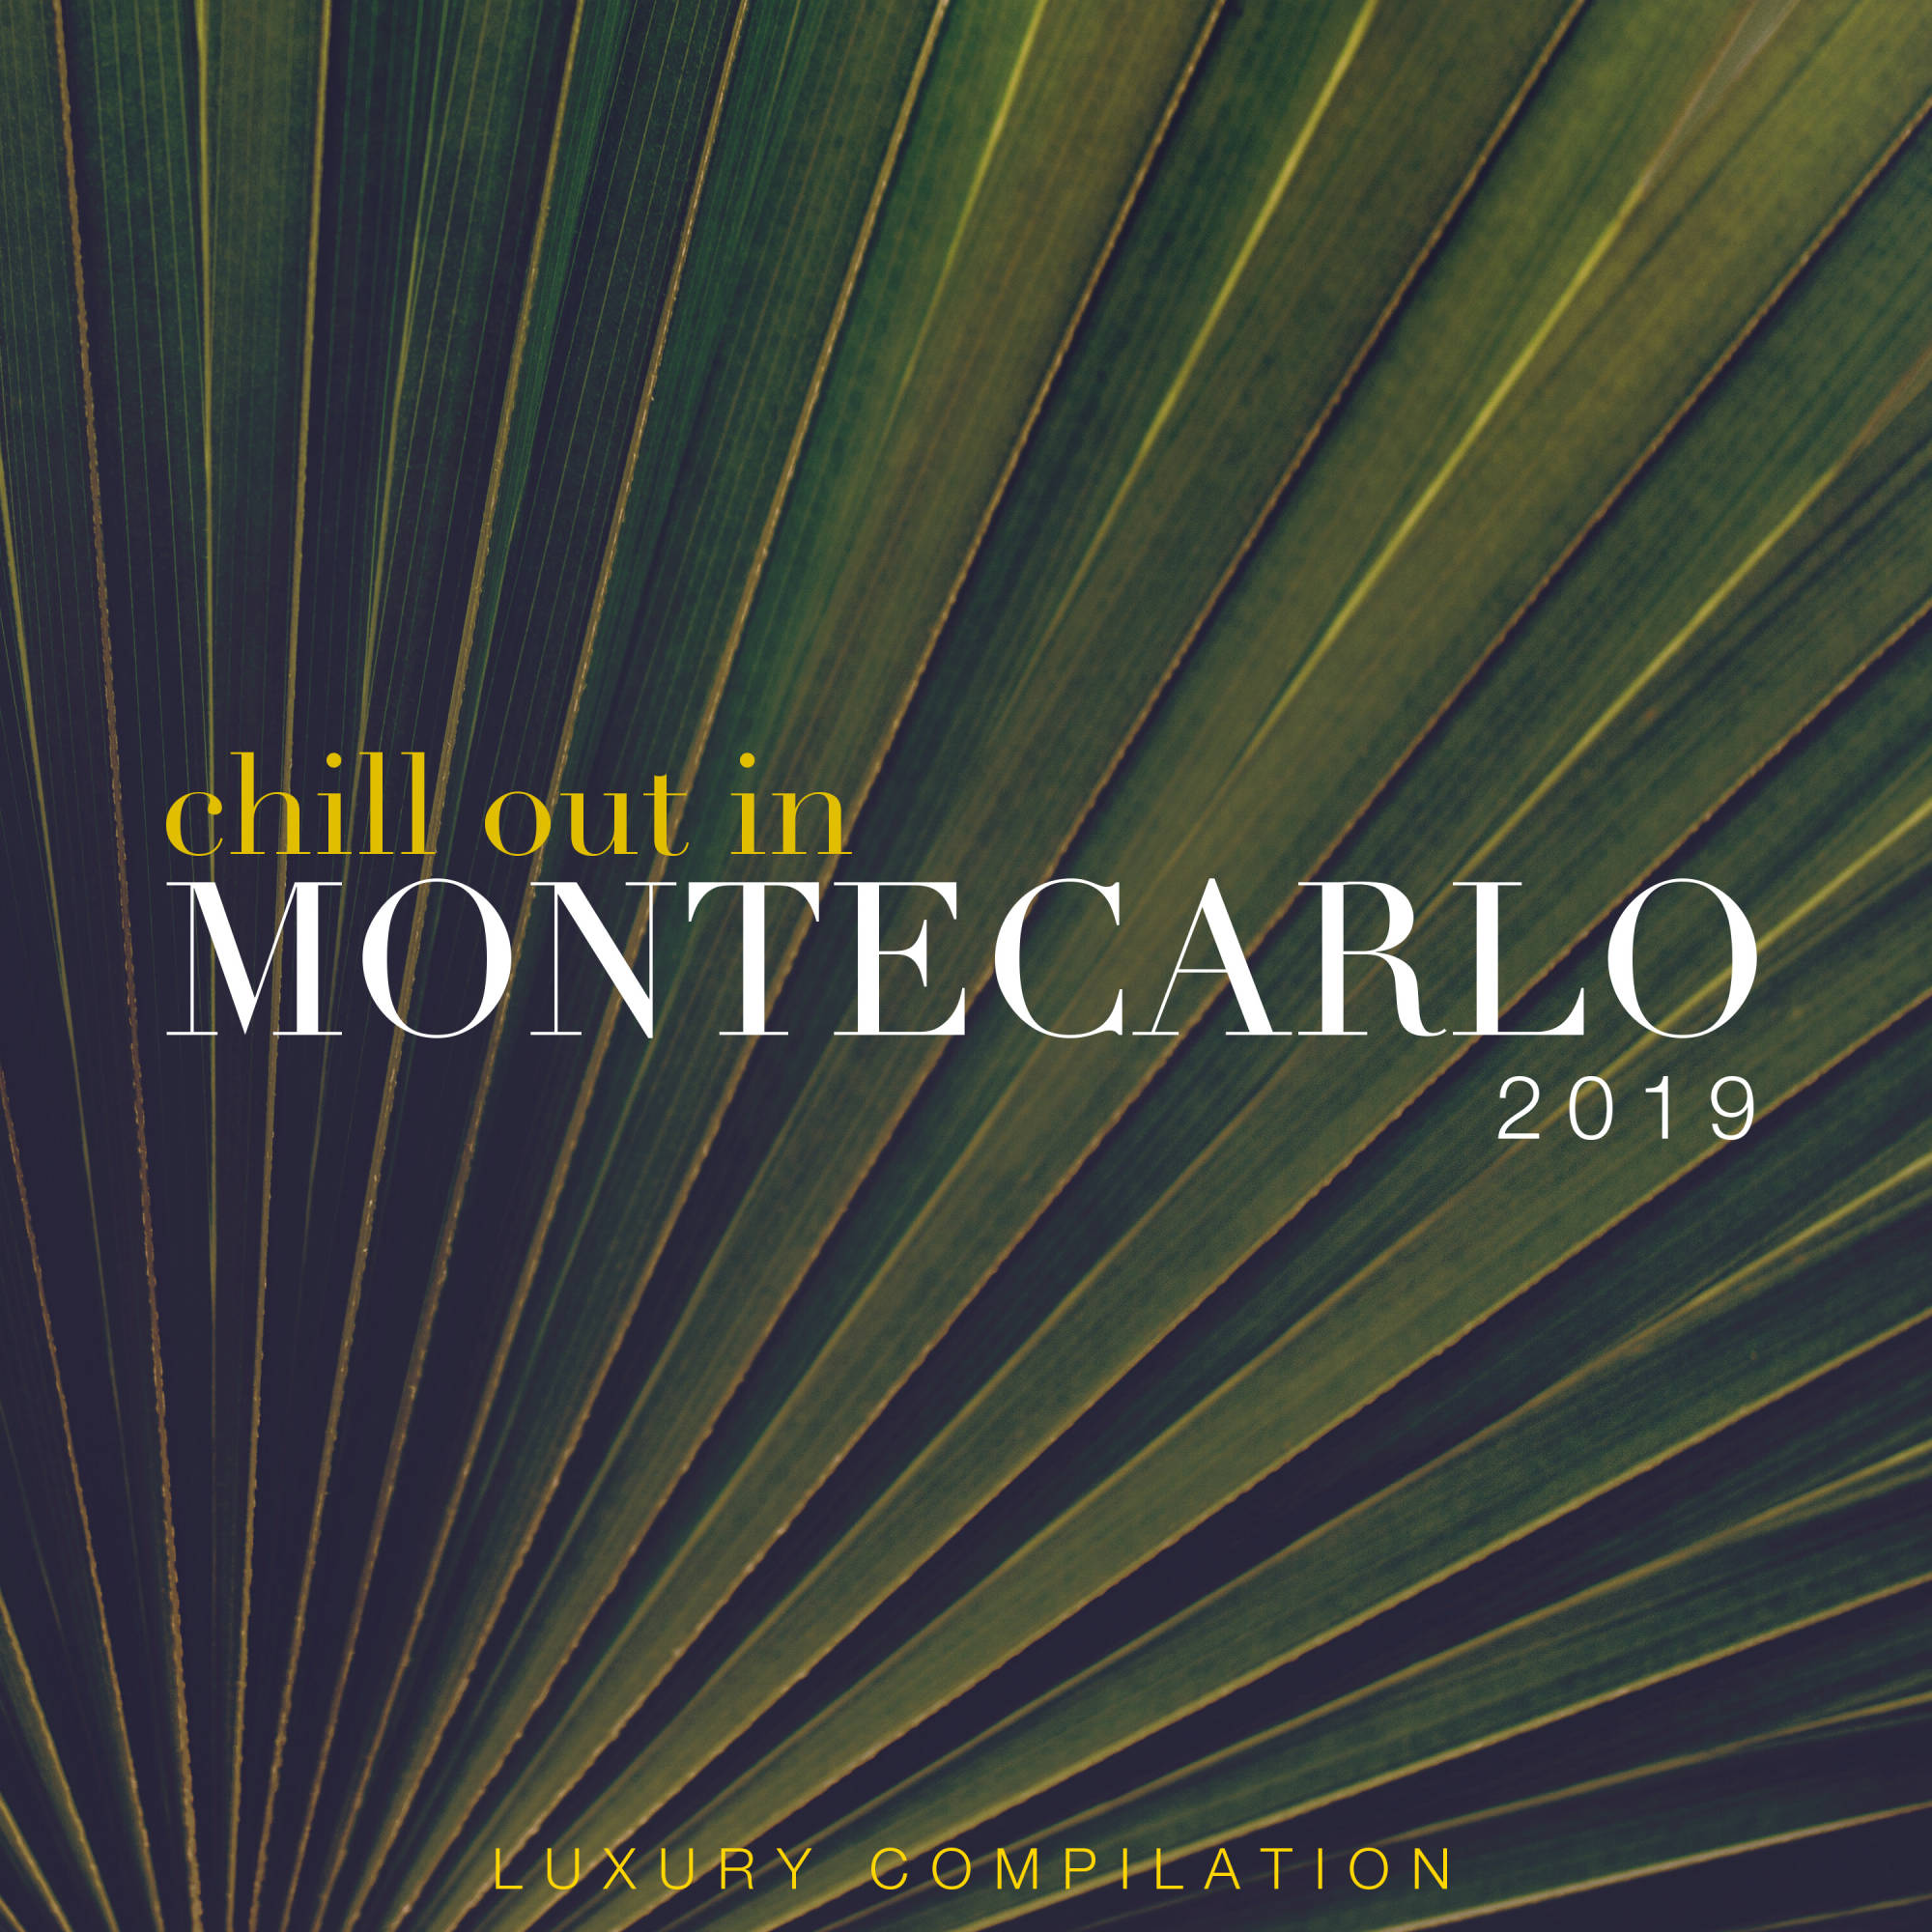 Chill out in Montecarlo 2019 (Luxury Compilation)